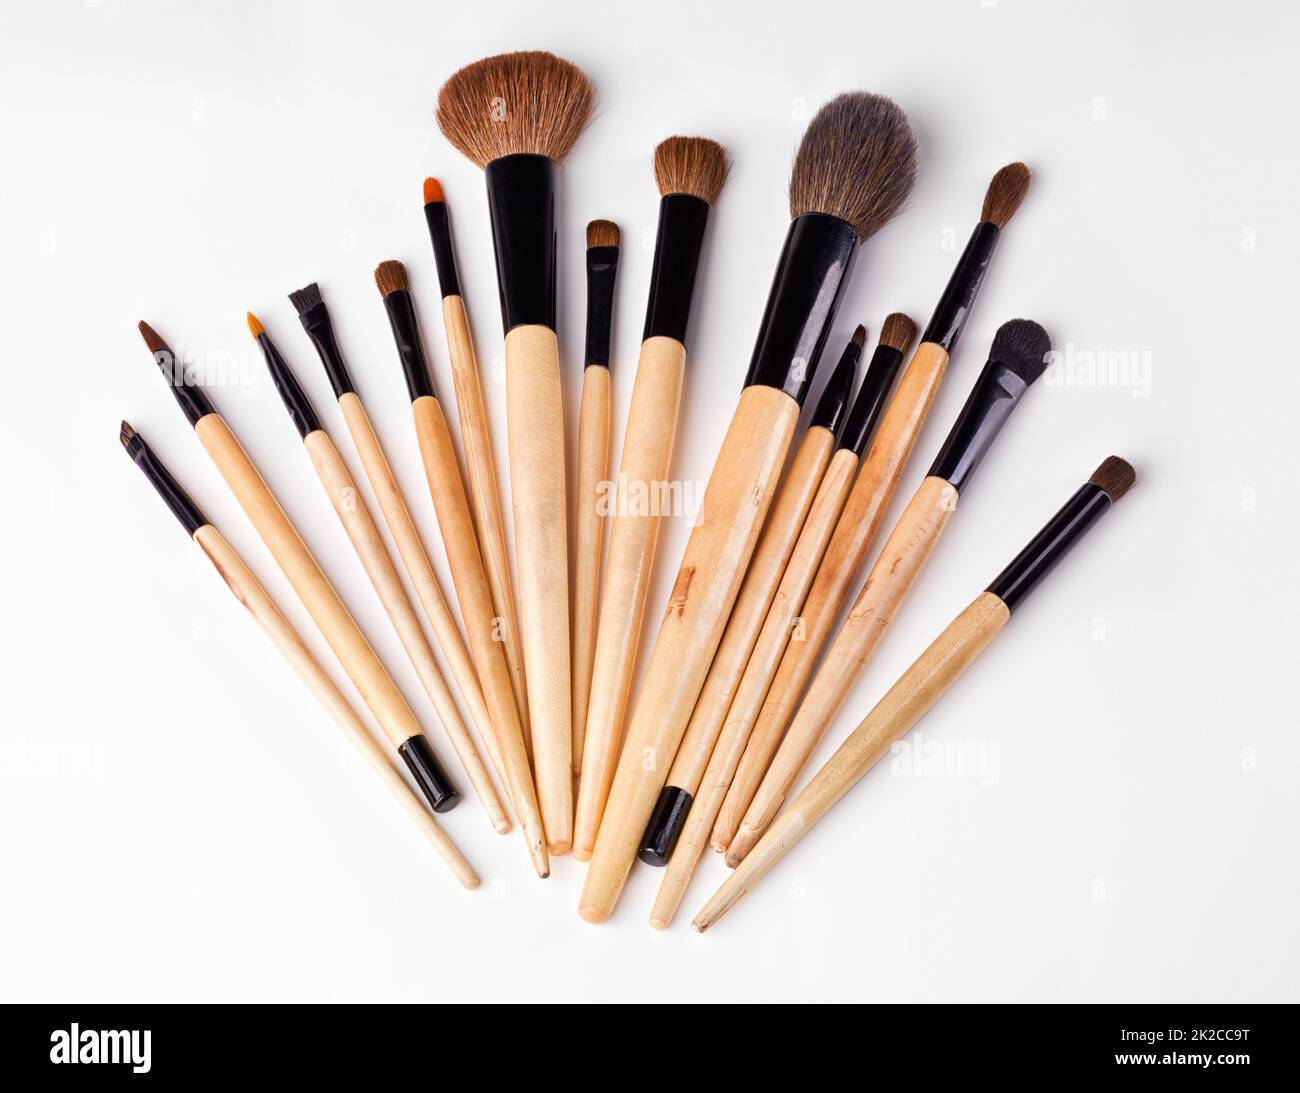 Brush away your flaws. An isolated shot of s set of makeup brushes. Stock Photo